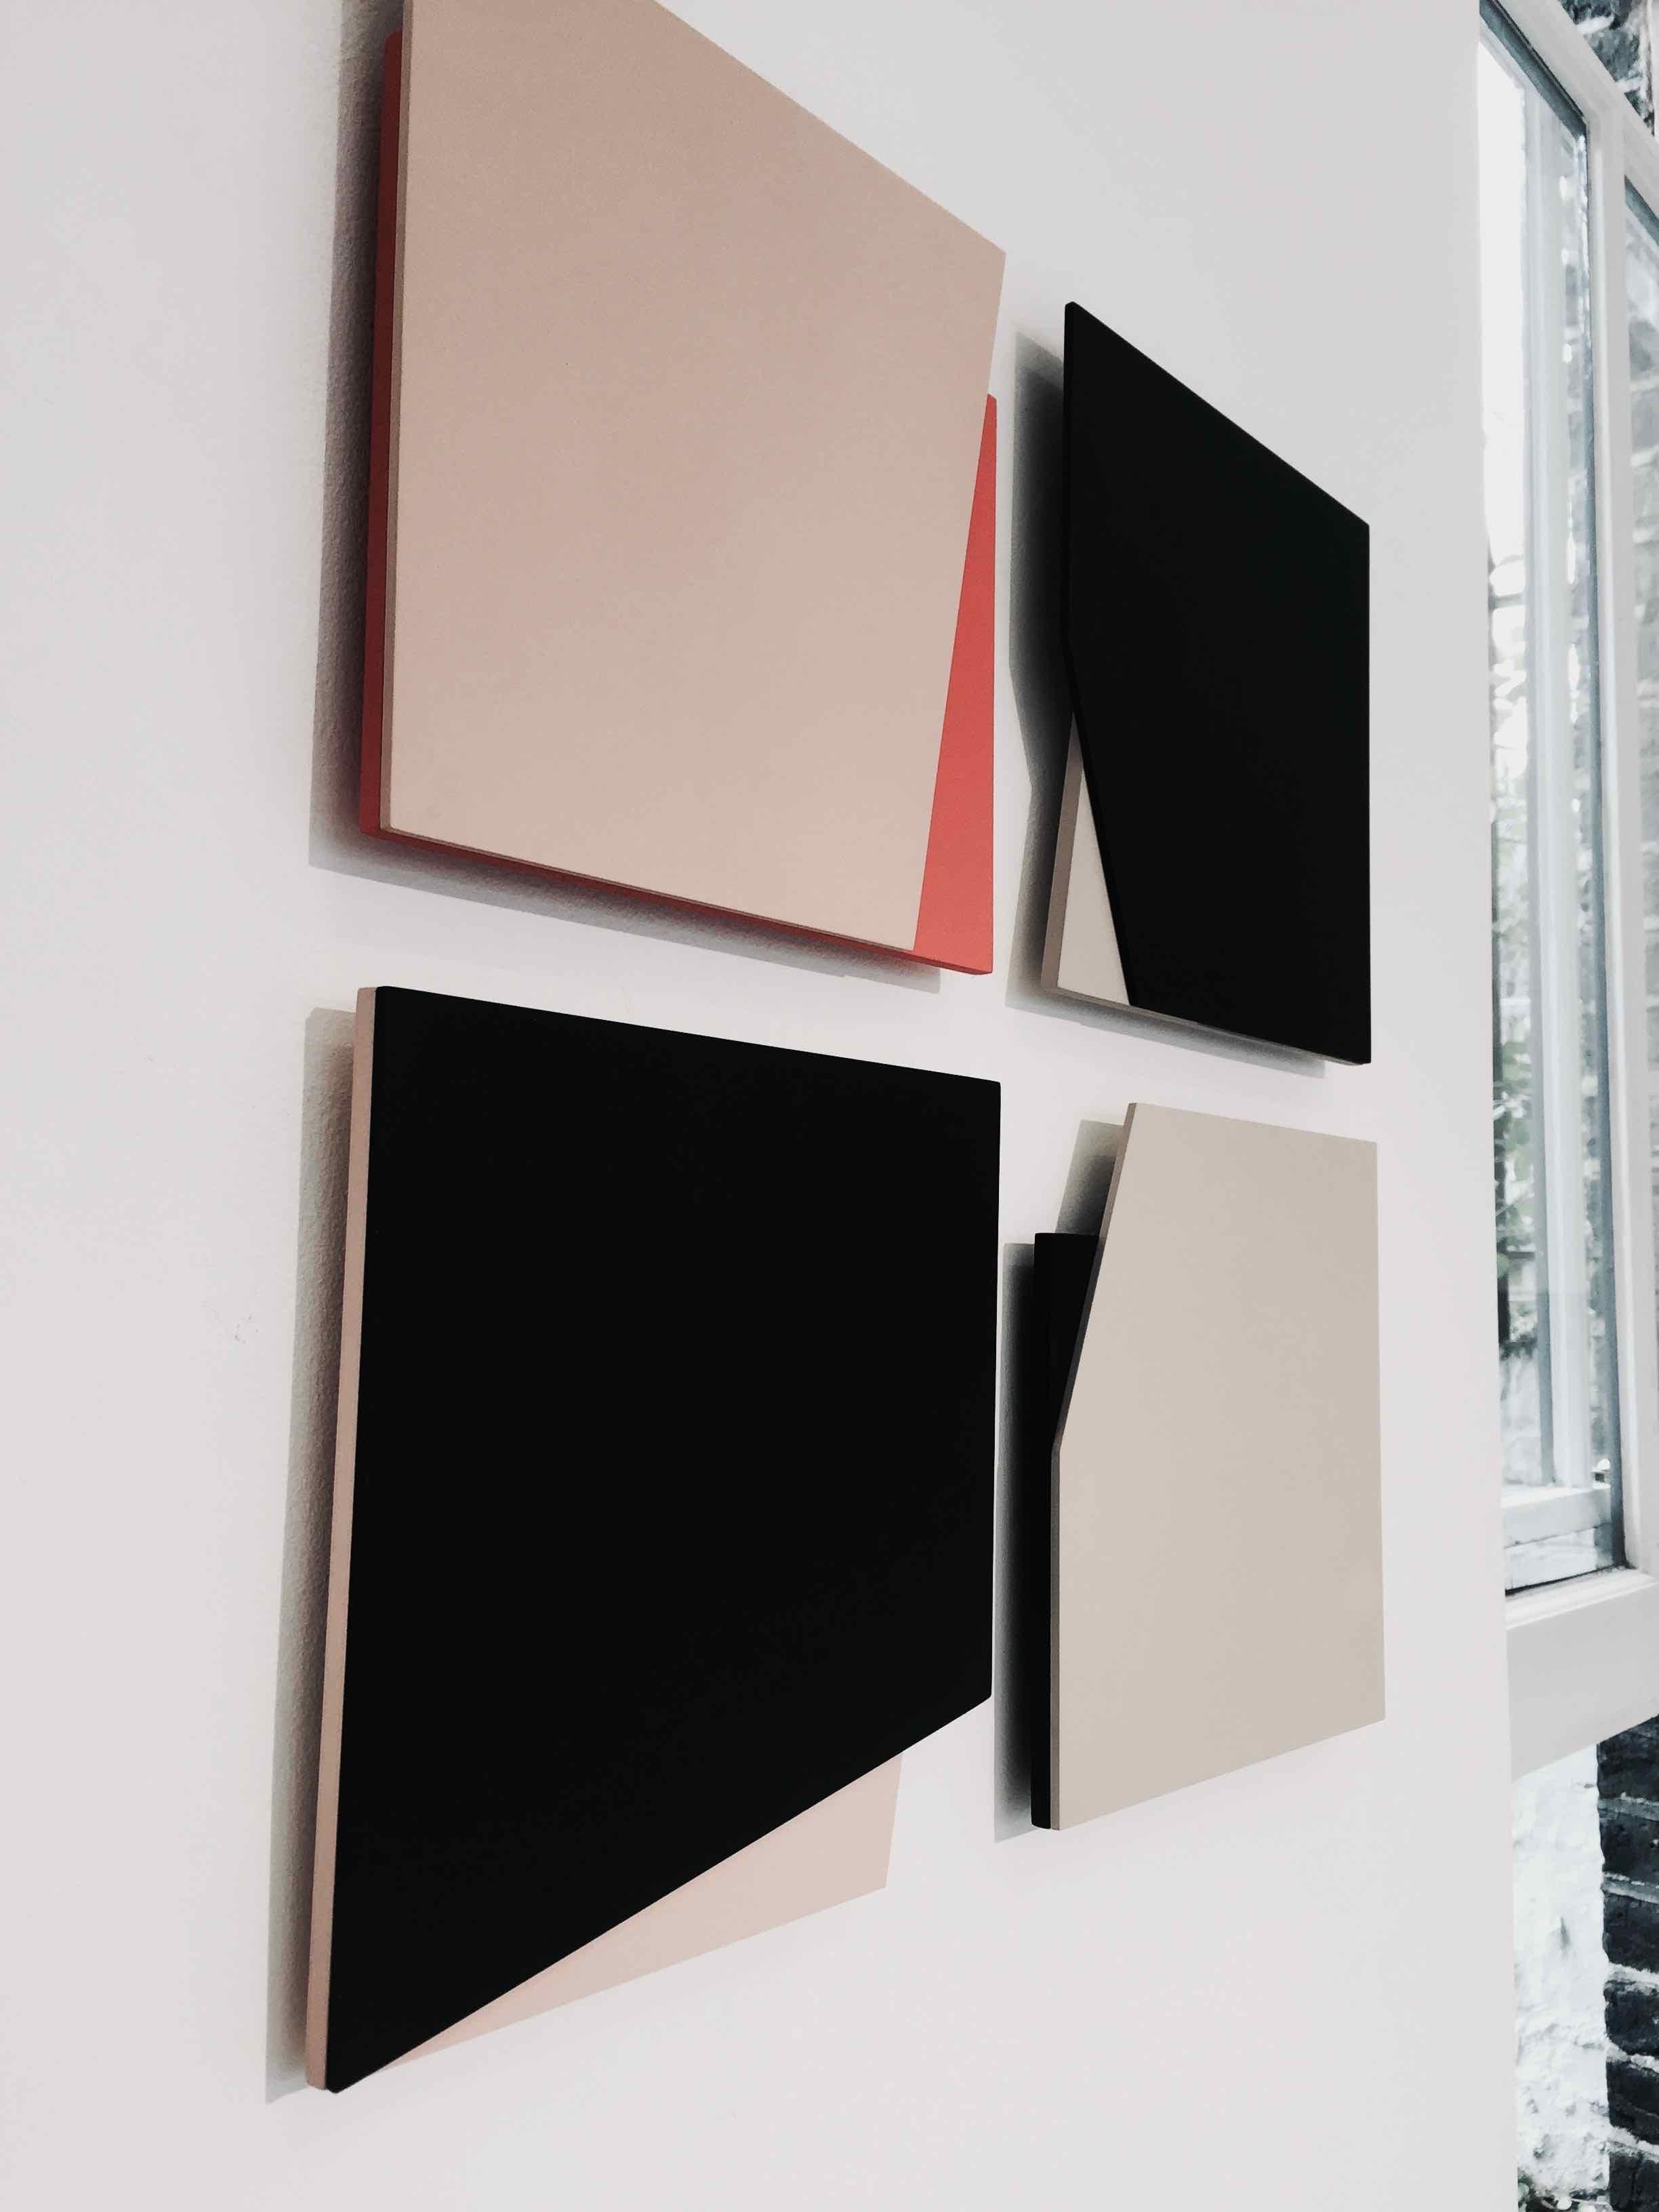 Laura Jane Scott Abstract Sculpture – 'Cut-out 20': Set of Four Minimal Hard Edge Abstract Paintings